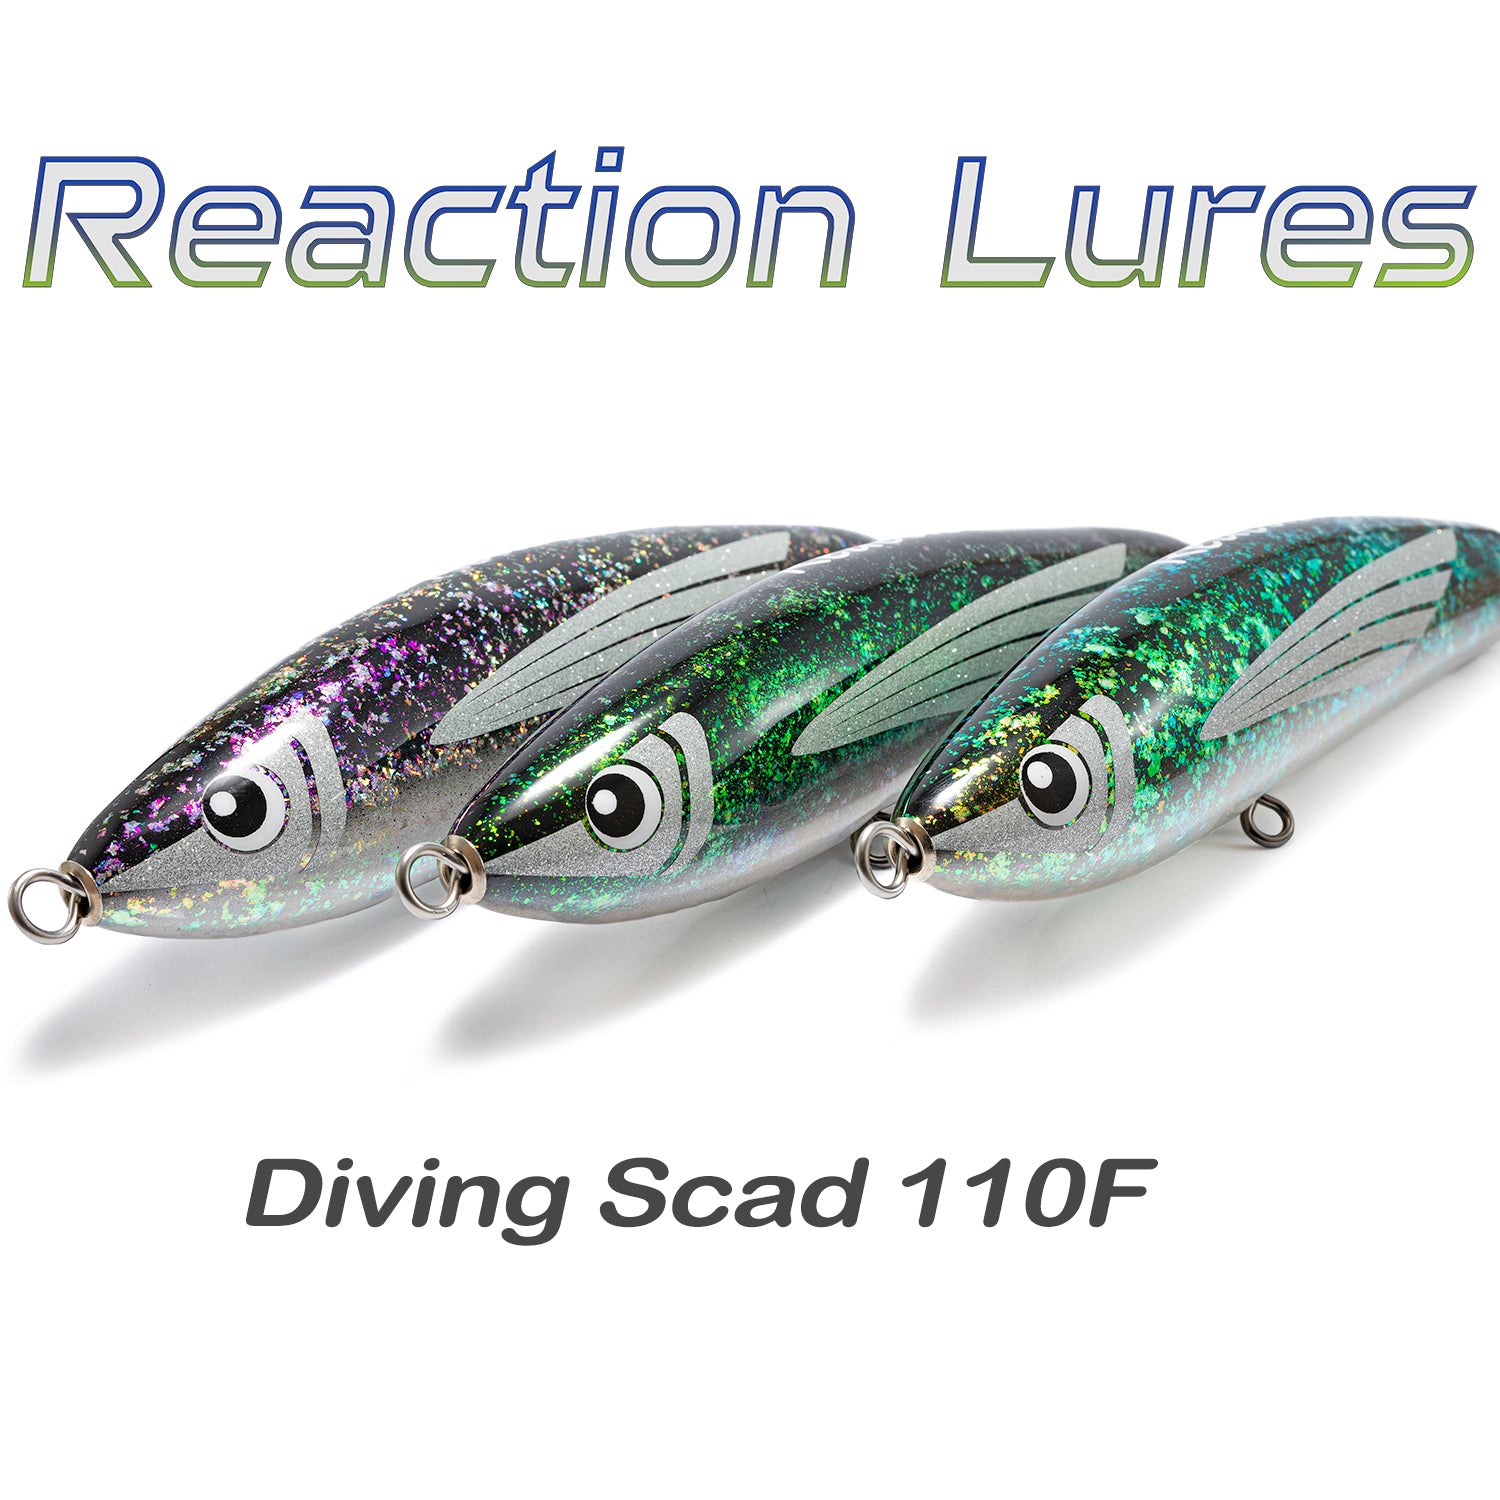 Reaction Lures Diving Scad 110F Cover